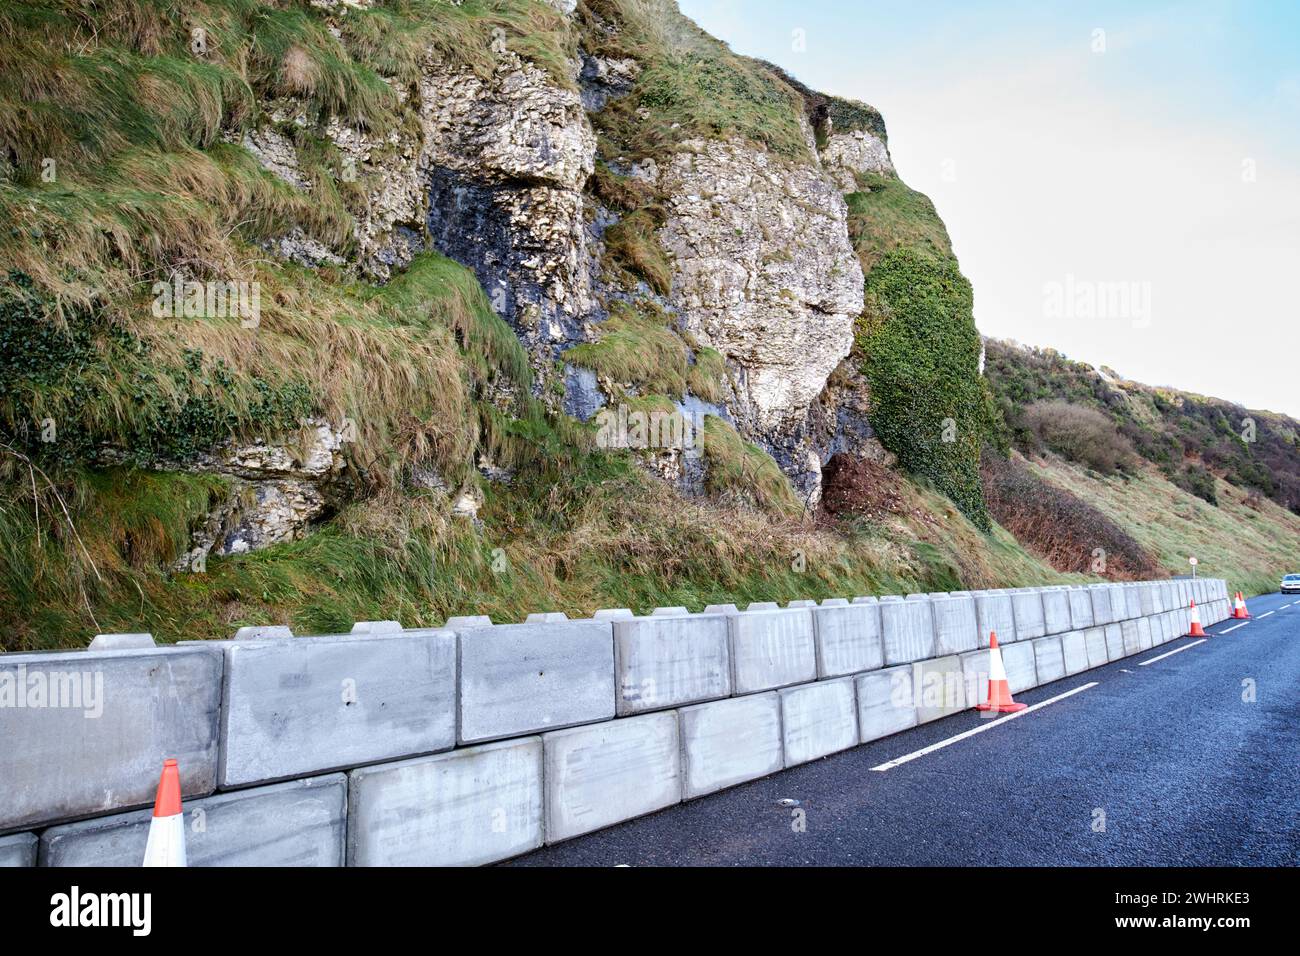 reduced lane and barriers due to cliff erosion landslide on the antrim coast road between larne and drains bay county antrim northern ireland uk Stock Photo